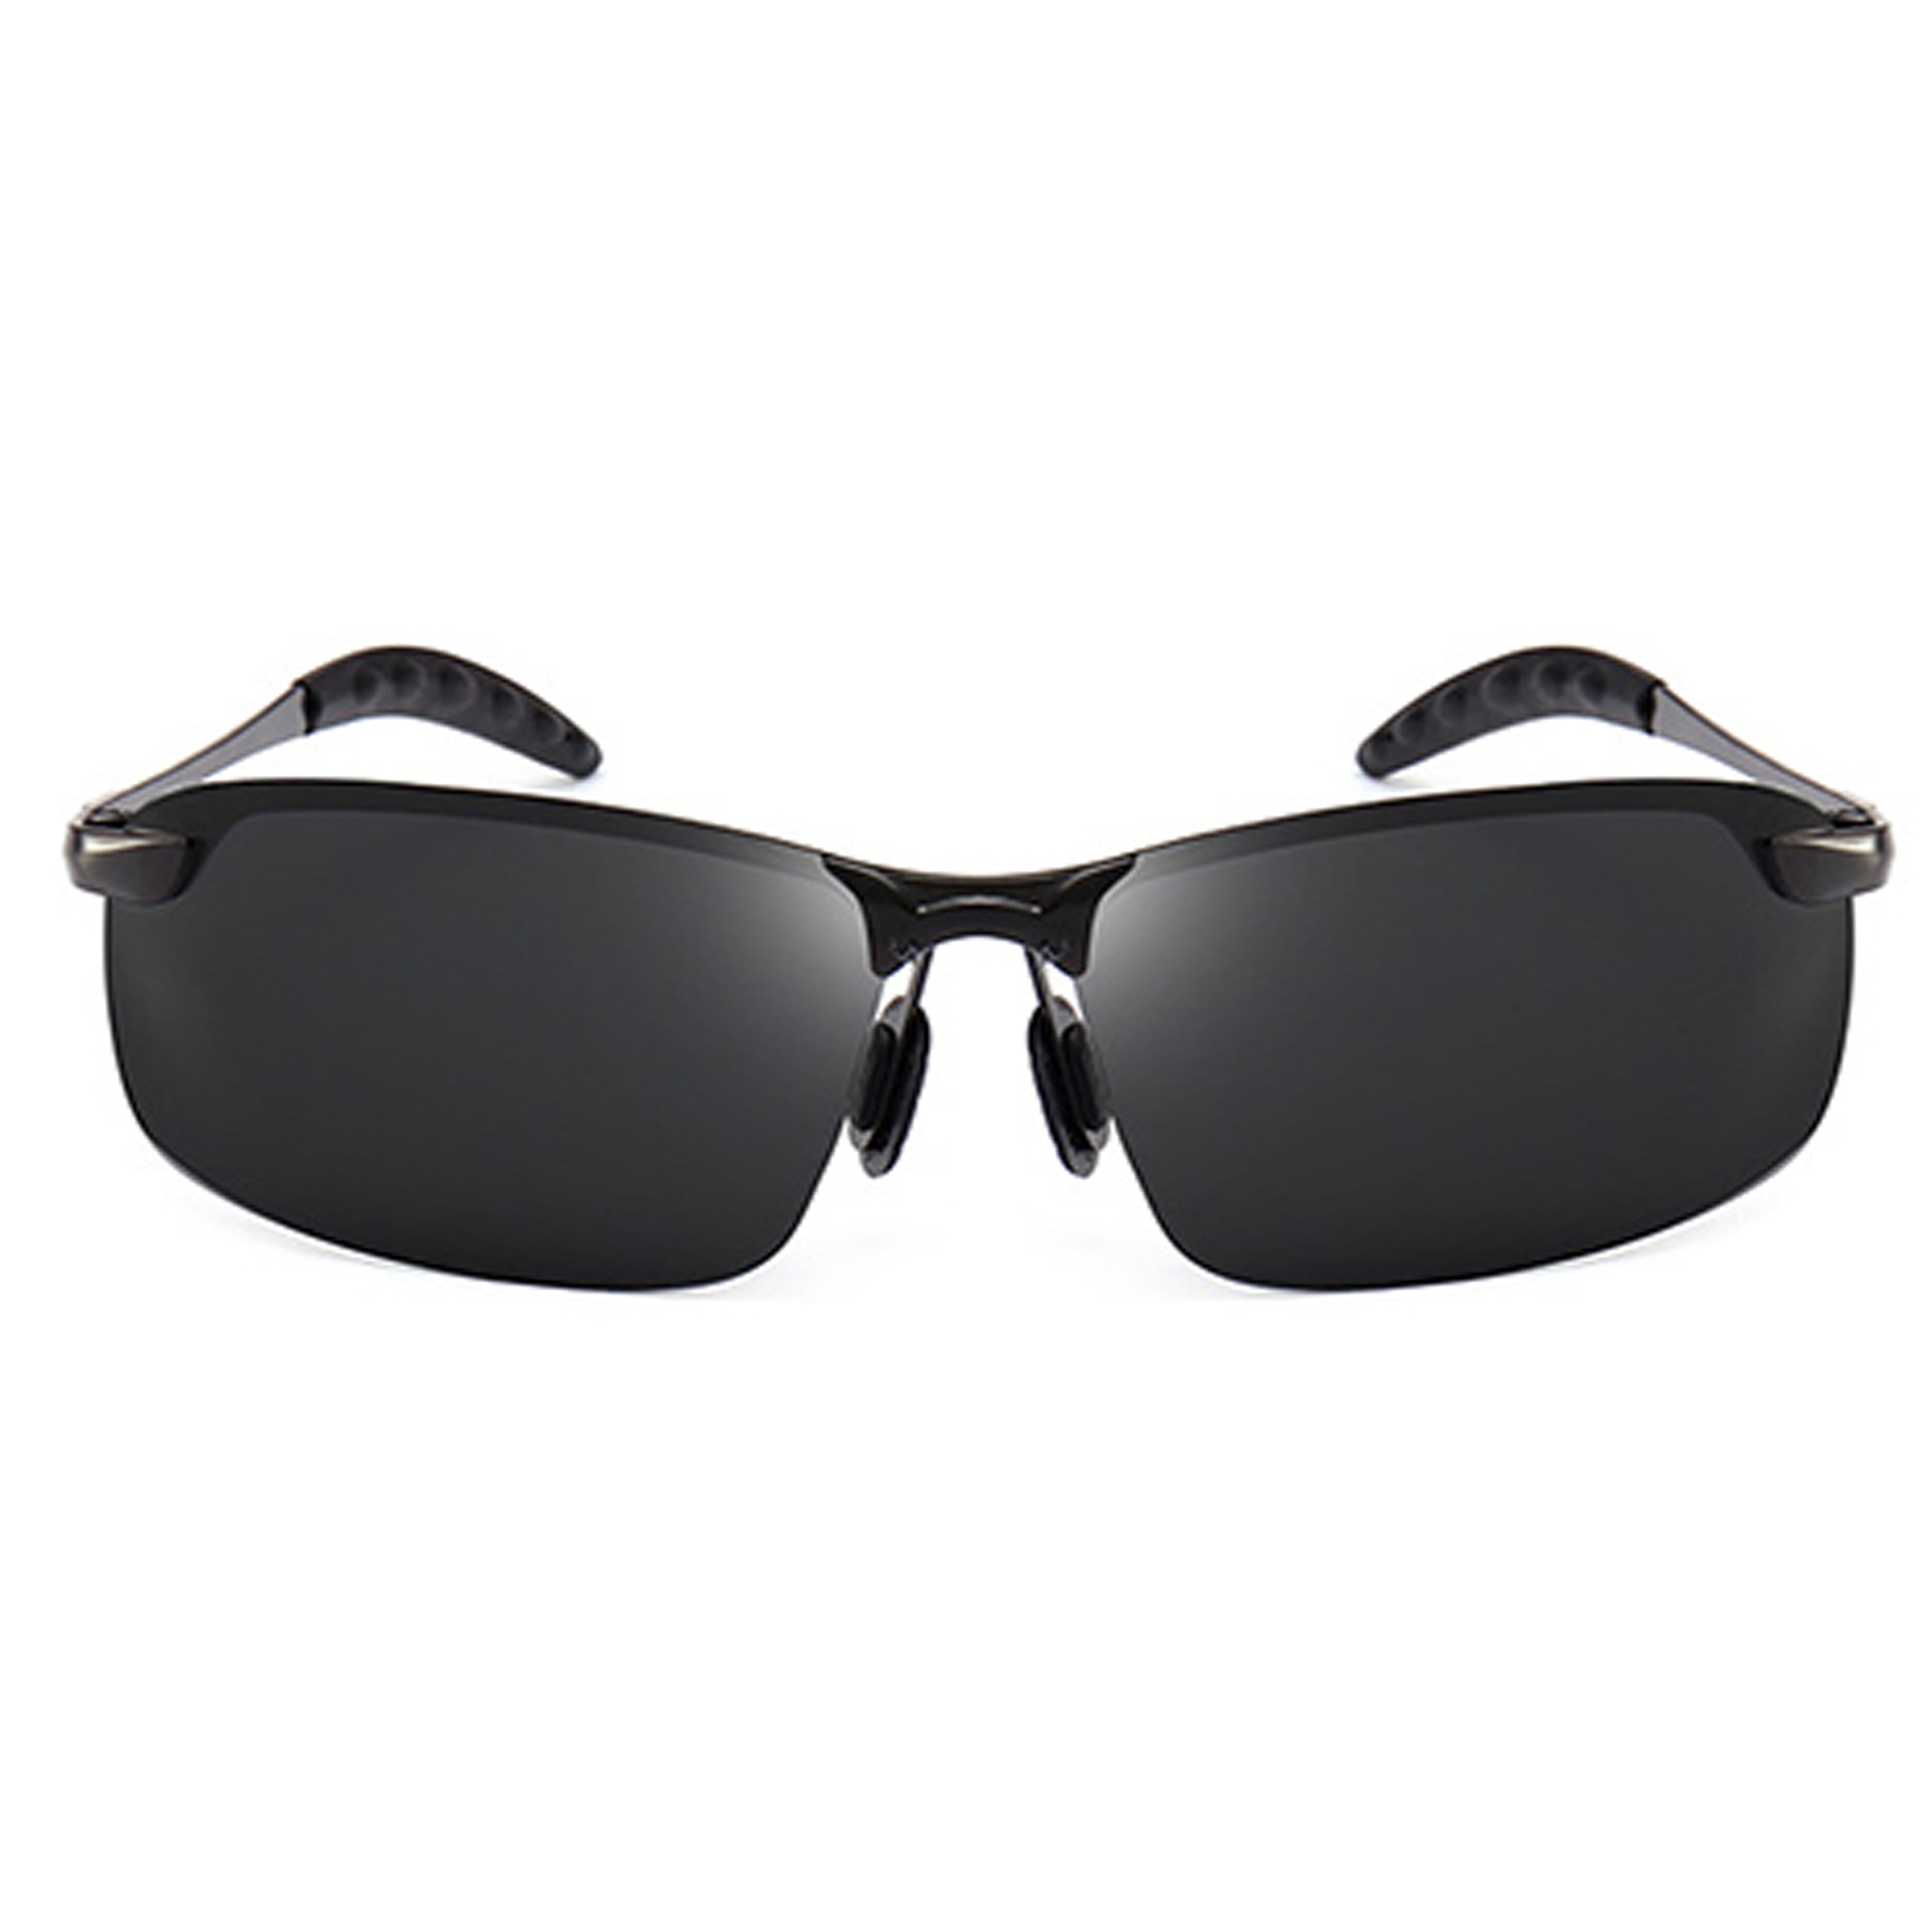 Polarized sunglasses suitable for the blind, air nose support glasses